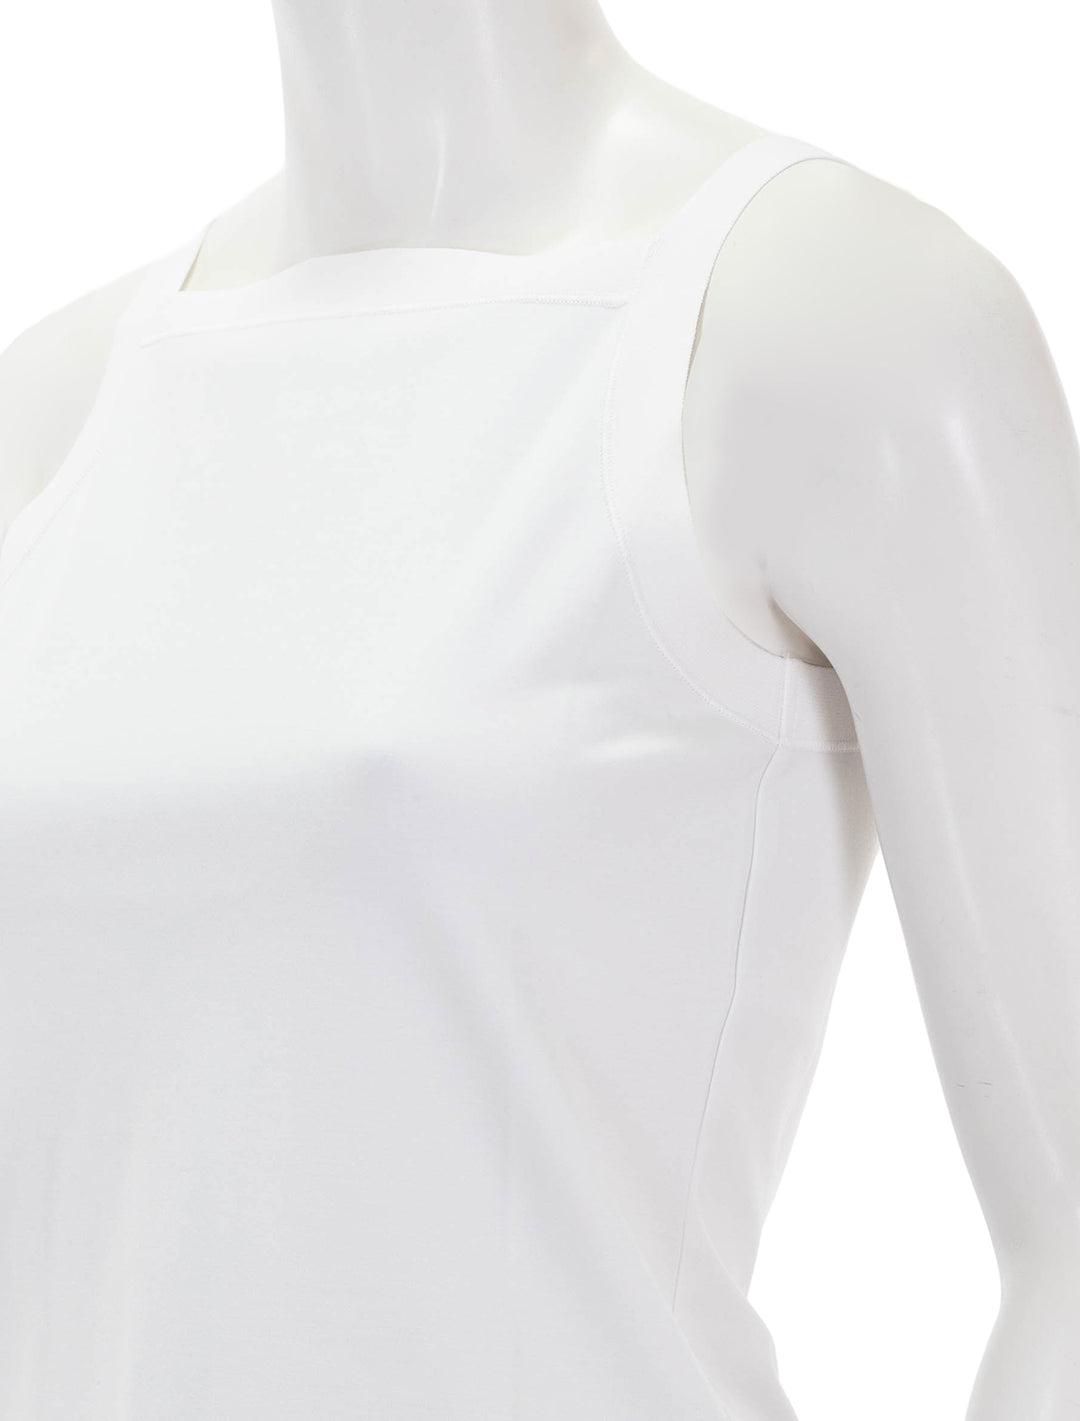 Close-up view of Theory's square high neck tank in white.